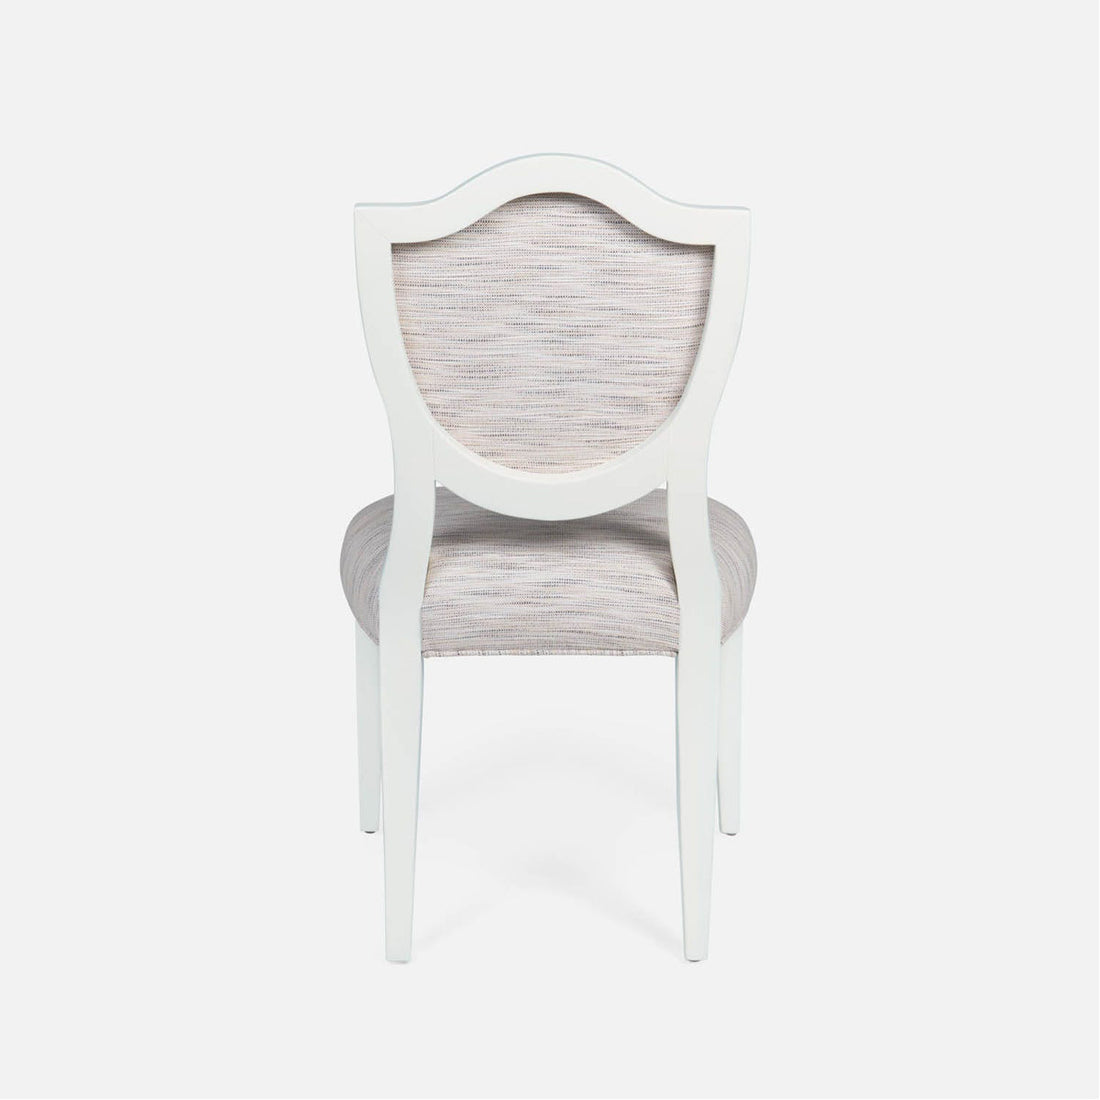 Made Goods Micah Upholstered Medallion Dining Chair in Pagua Fabric